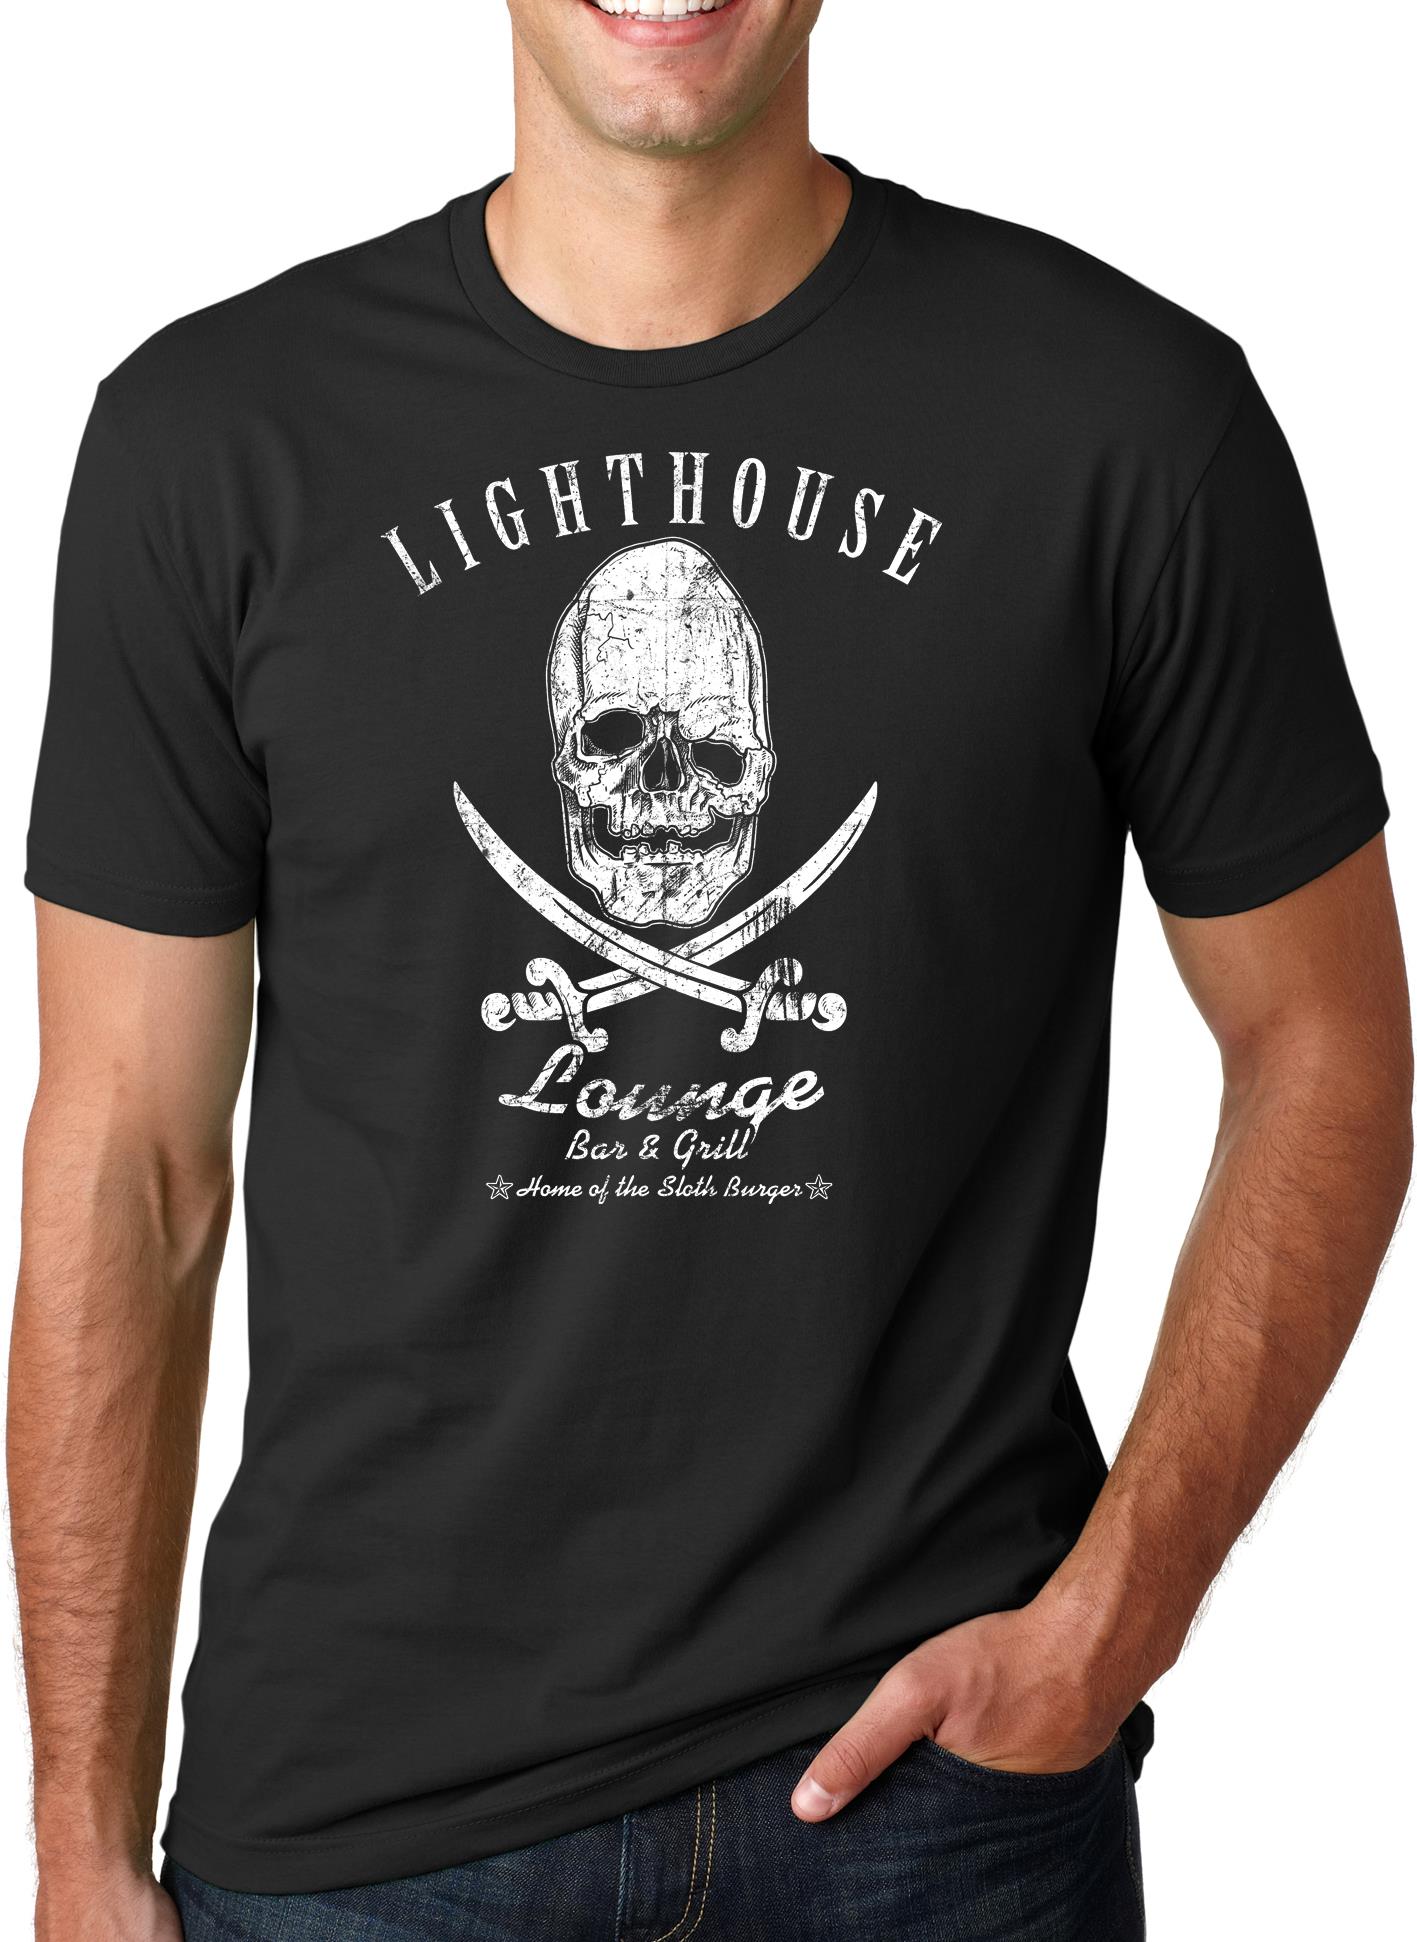 Lighthouse Lounge Bar and Grill T Shirt Funny Movie Parody Shirt 3XL